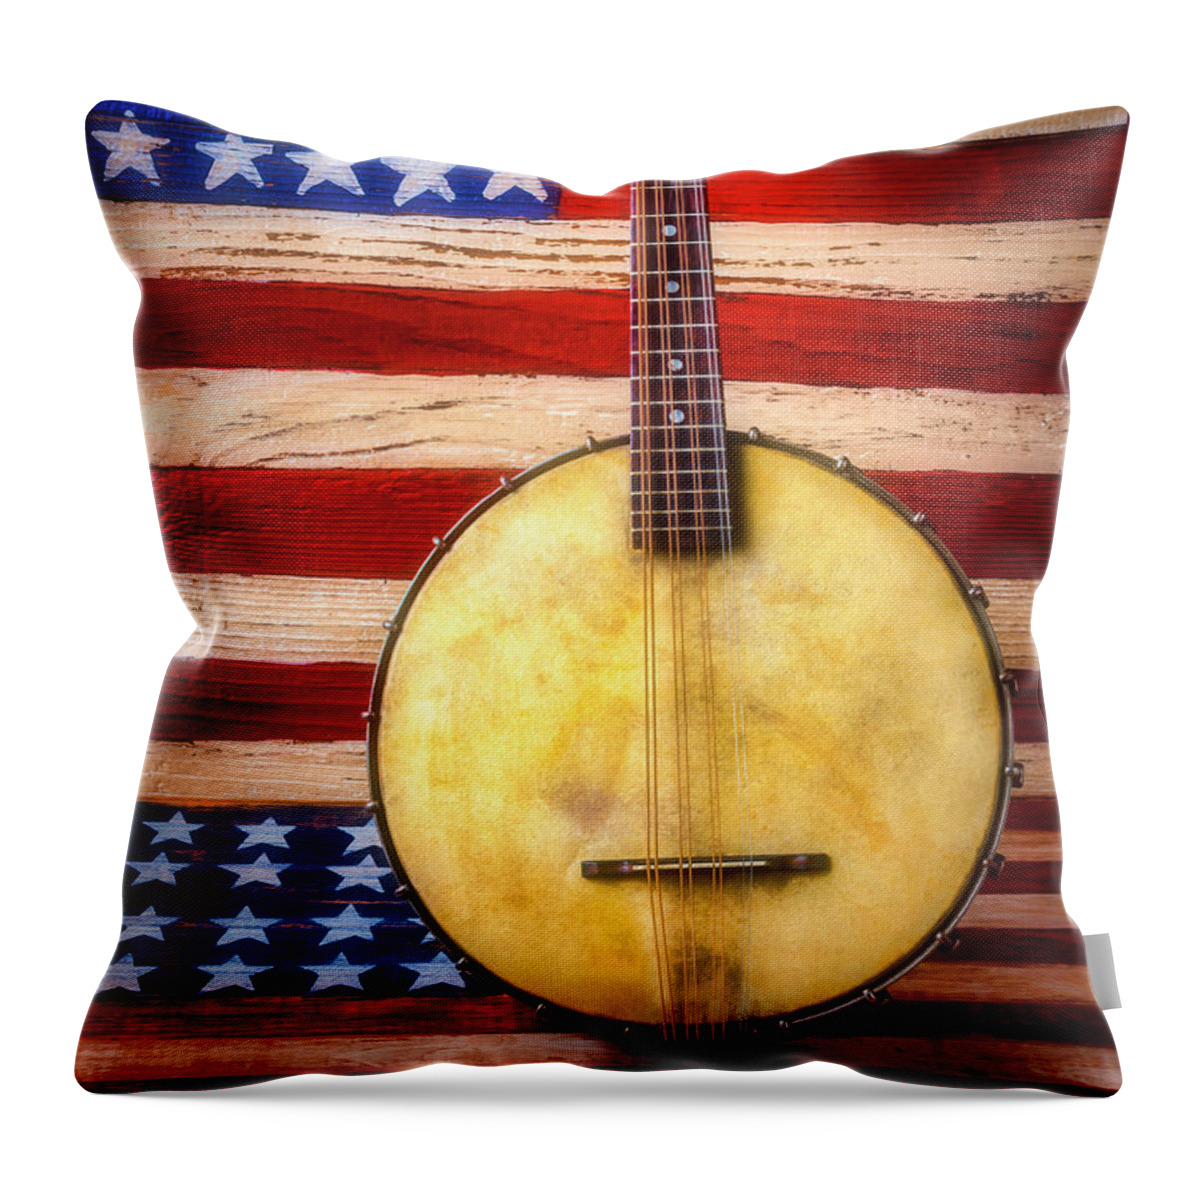 American Throw Pillow featuring the photograph American Banjo Folk Art Flag by Garry Gay